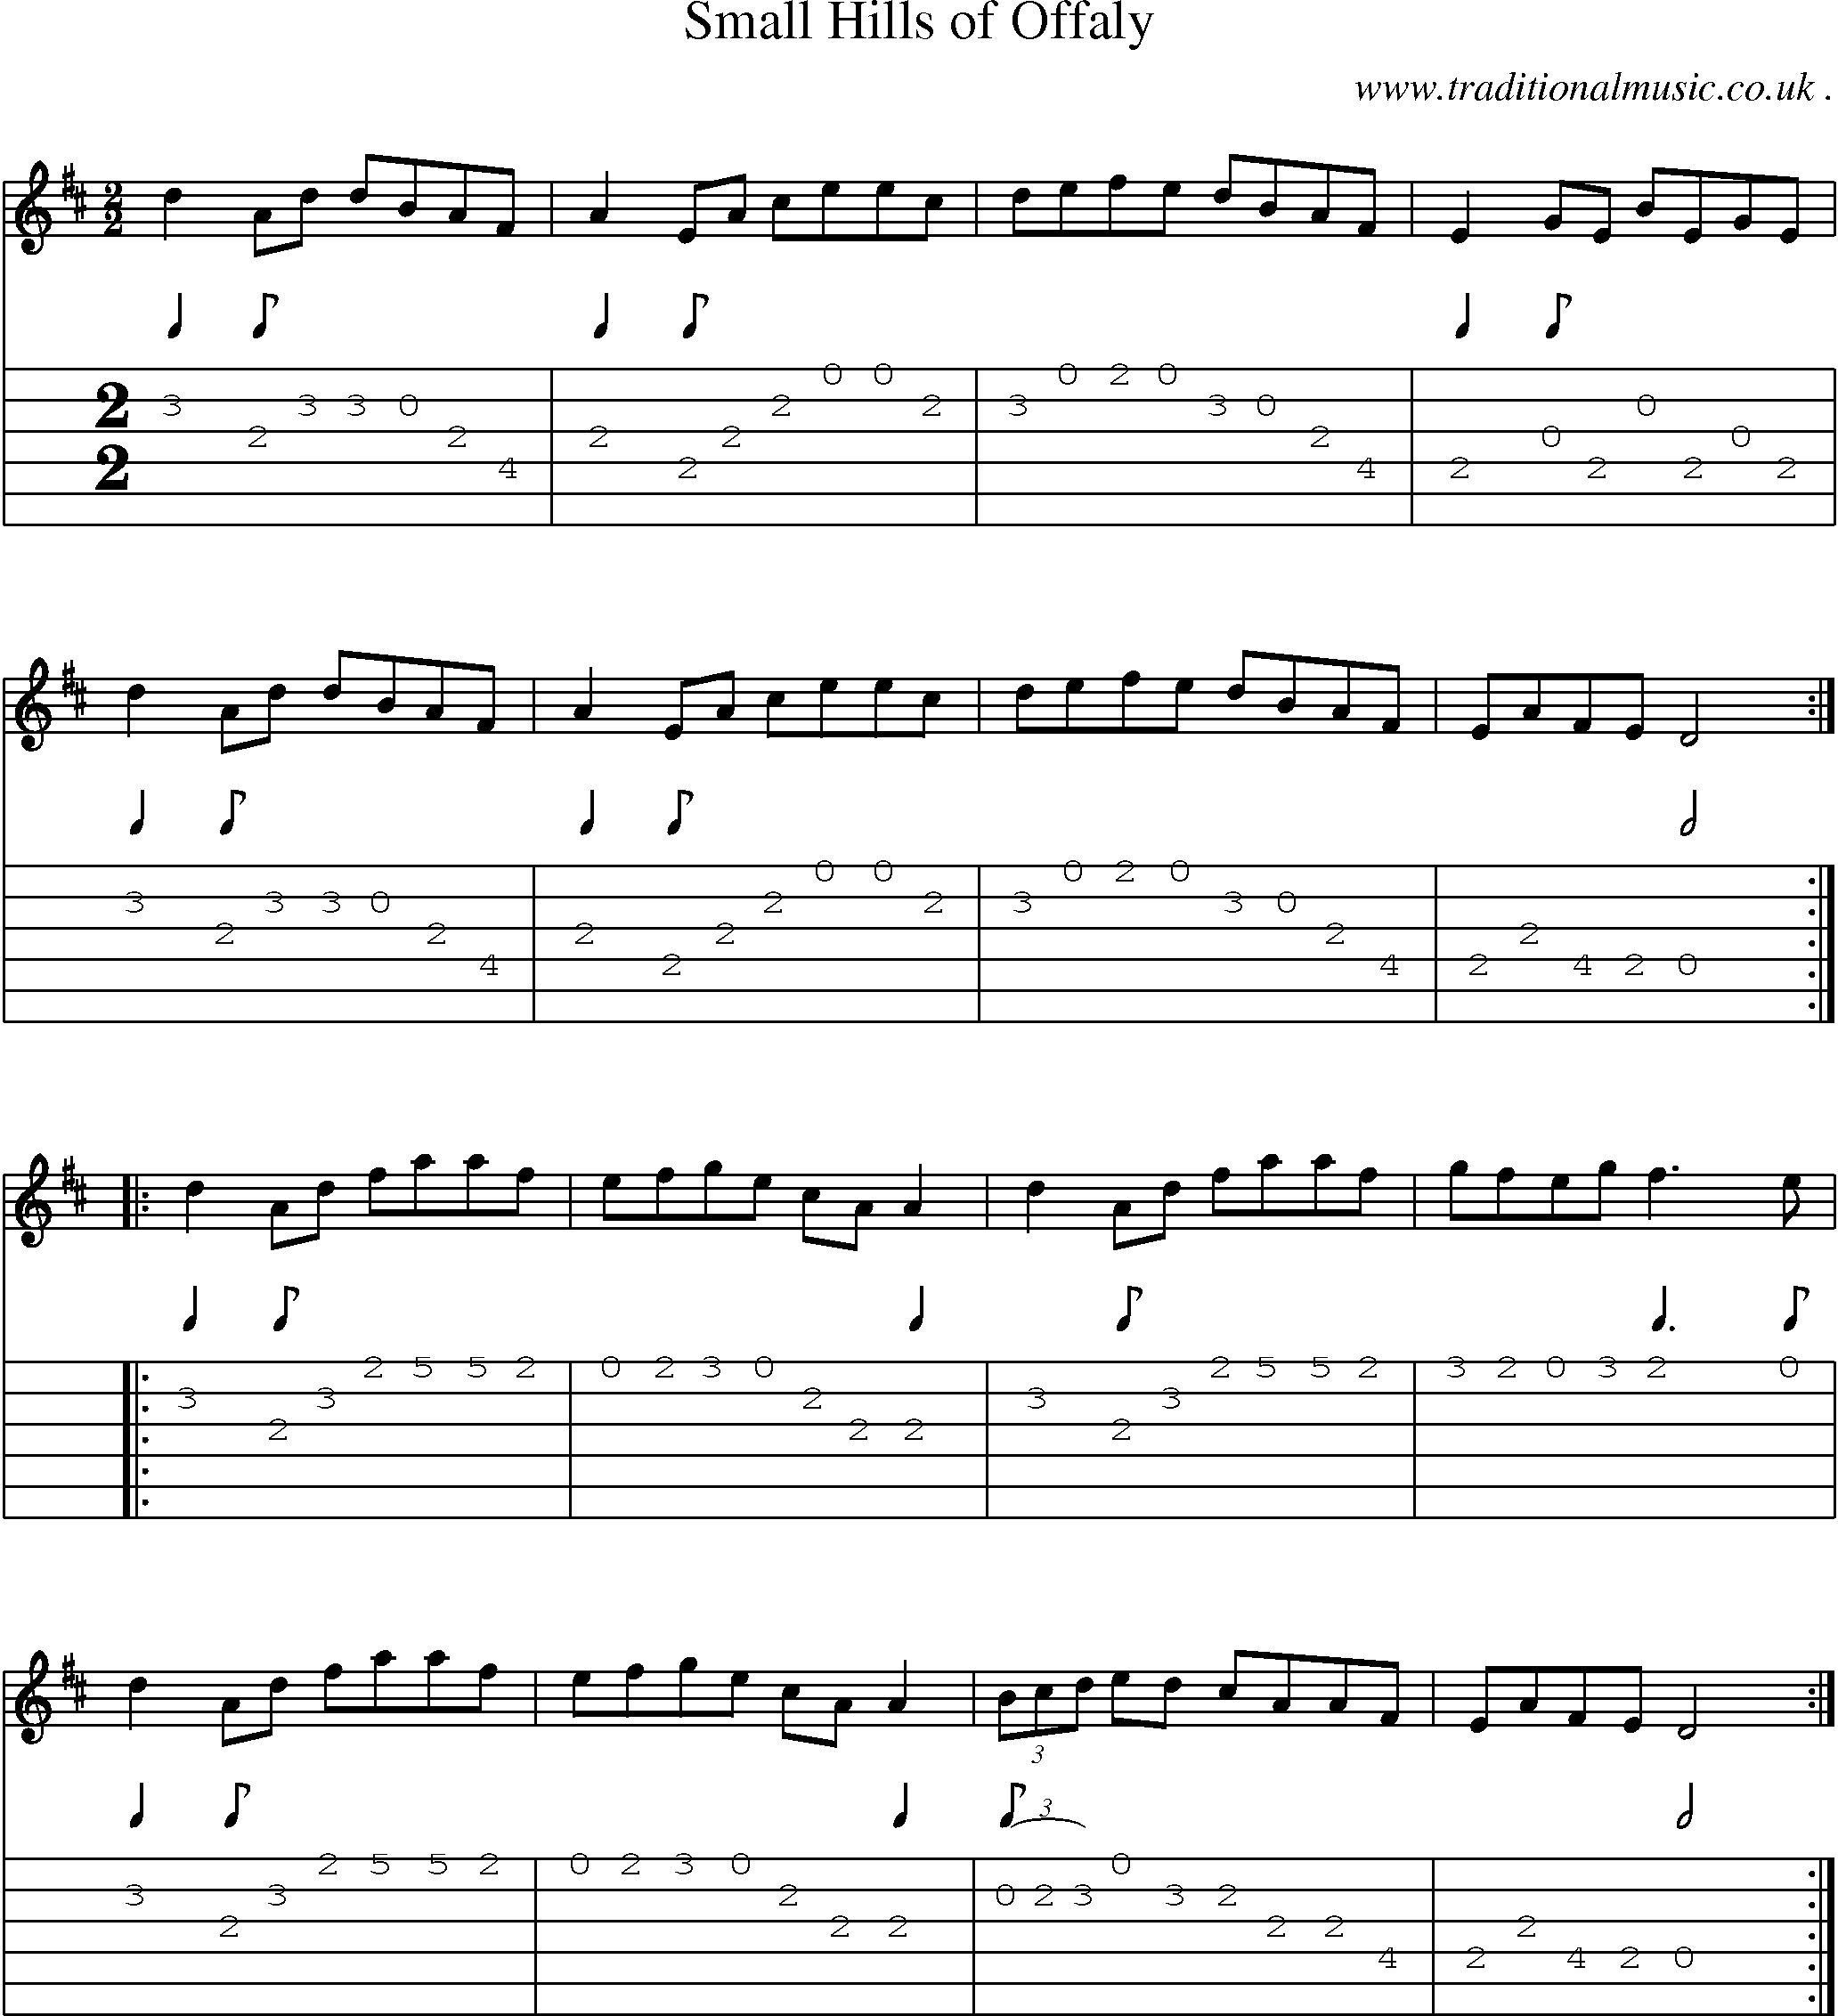 Sheet-Music and Guitar Tabs for Small Hills Of Offaly